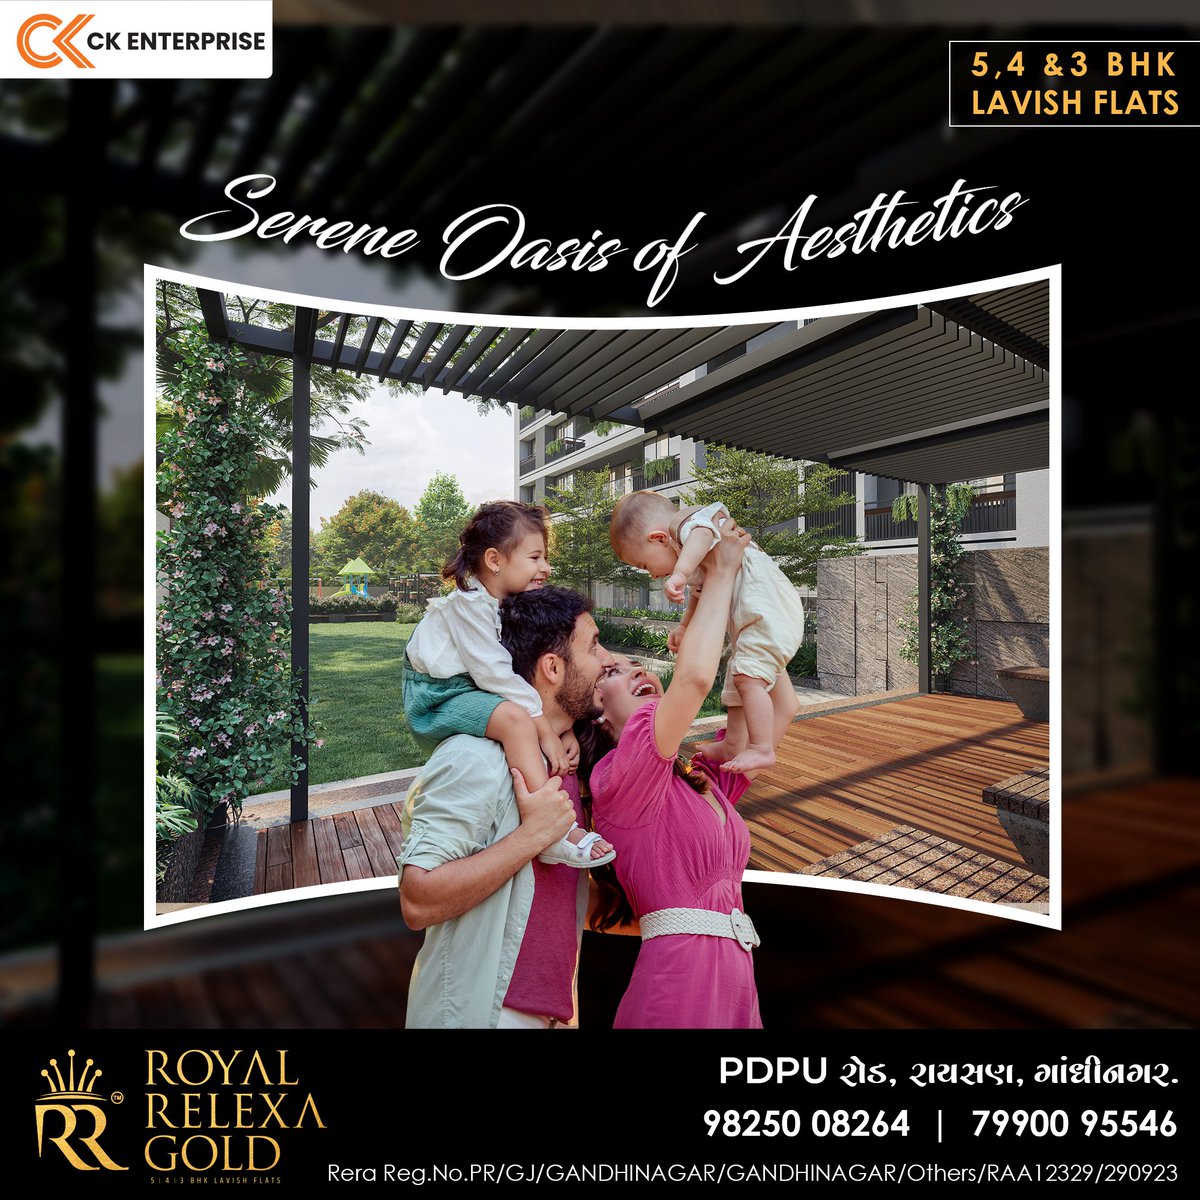 '🌿 Discover your perfect home at Royal Relexa Gold! With options ranging from spacious 5/4/3 BHK flats, find the ideal space for your family to grow and thrive. 🏡✨
.
.
.
.
.
.
.
.
.
#ckenterprise #royalrelexagold #spaciousflats #idealspace #luxuriousliving #newpost